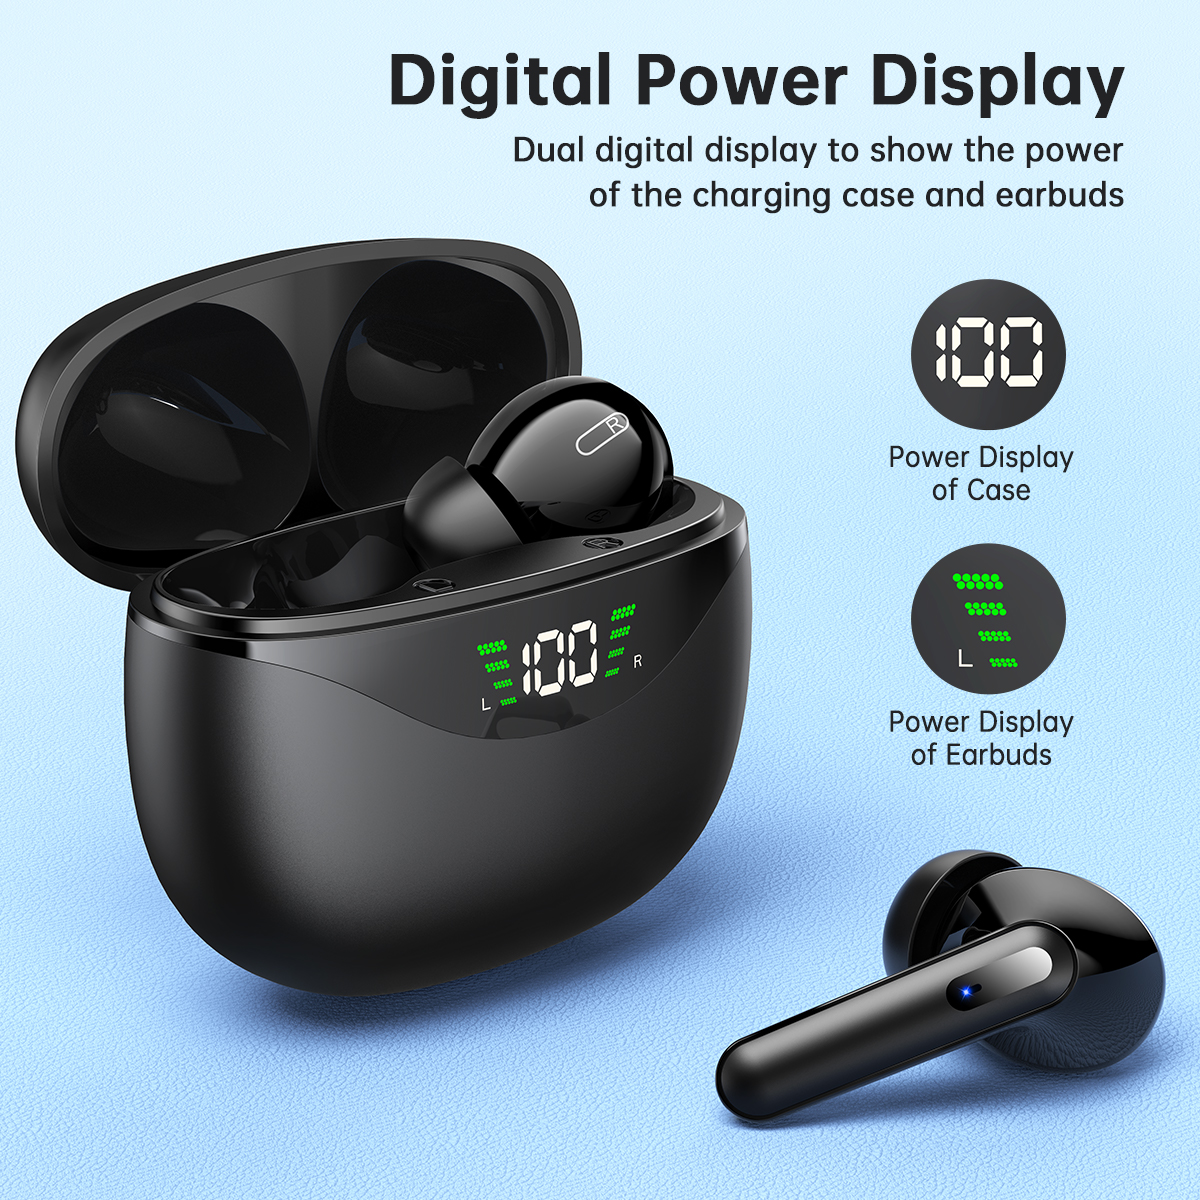 Wireless Earbuds, Bluetooth 5.1 Headphones 30Hrs Playtime with LED Power Display, IPX7 Waterproof Earphones, One-Step Pairing, TWS in Ear Stereo Headset Built-in Mic for iPhone/Android (Black) - image 2 of 7